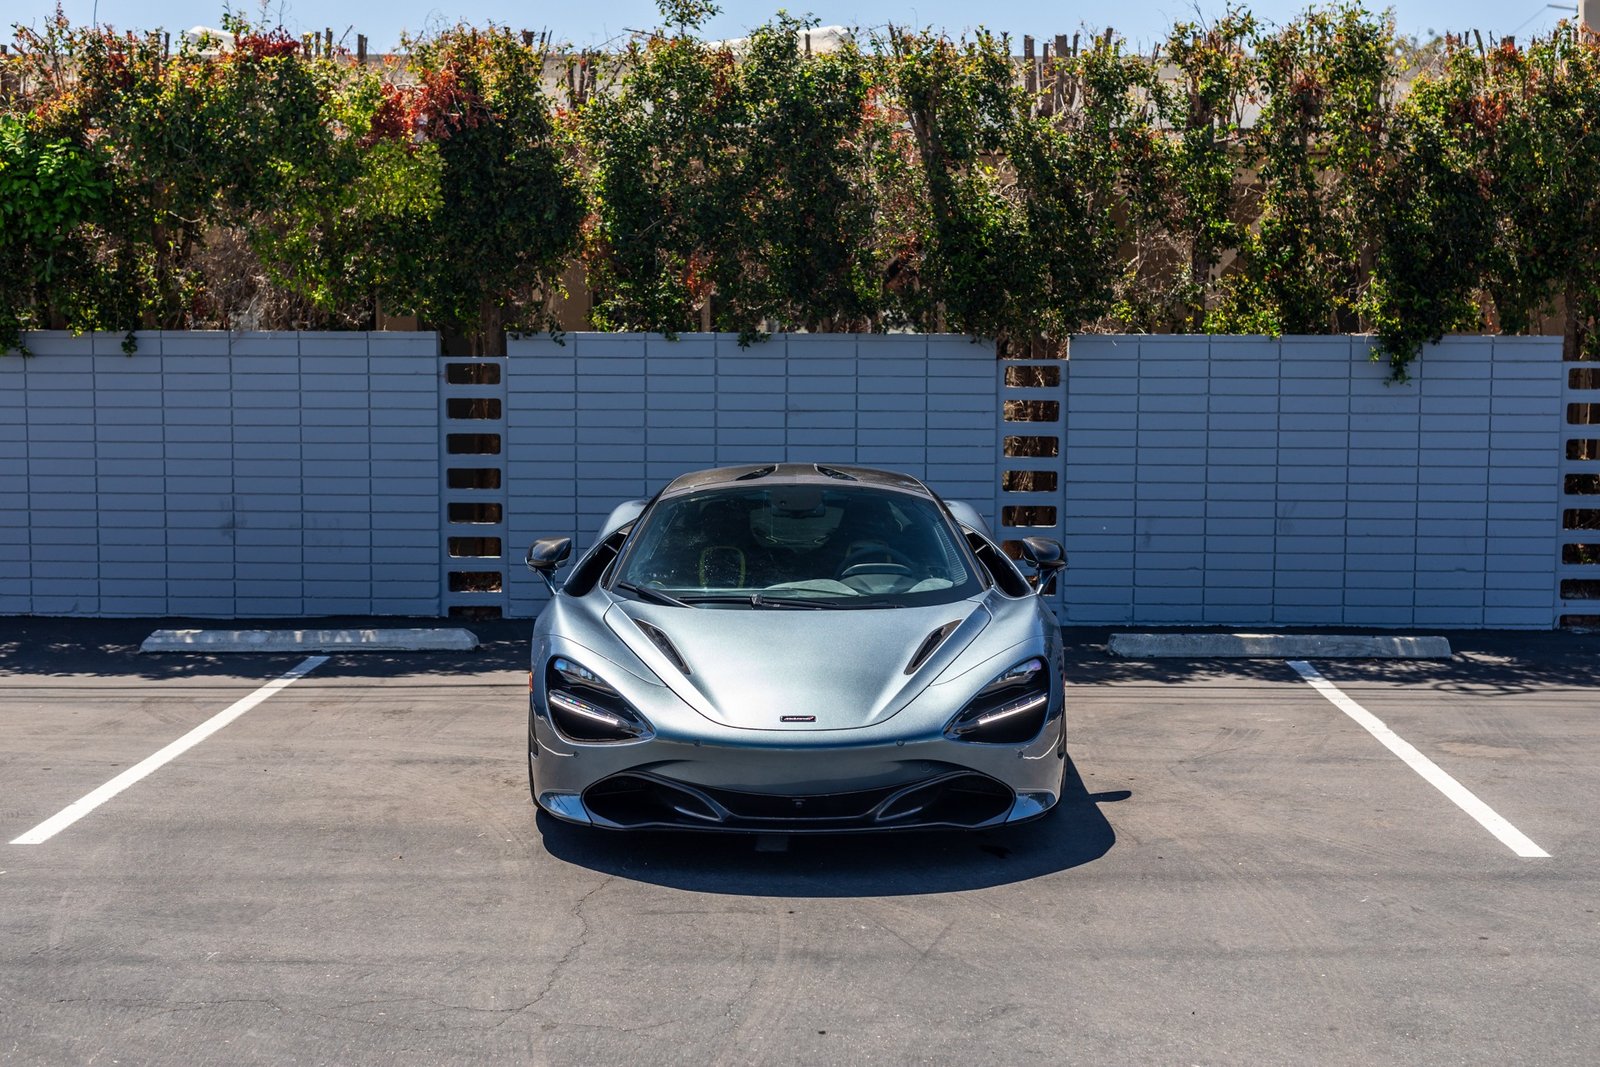 Used 2018 McLaren 720S For Sale